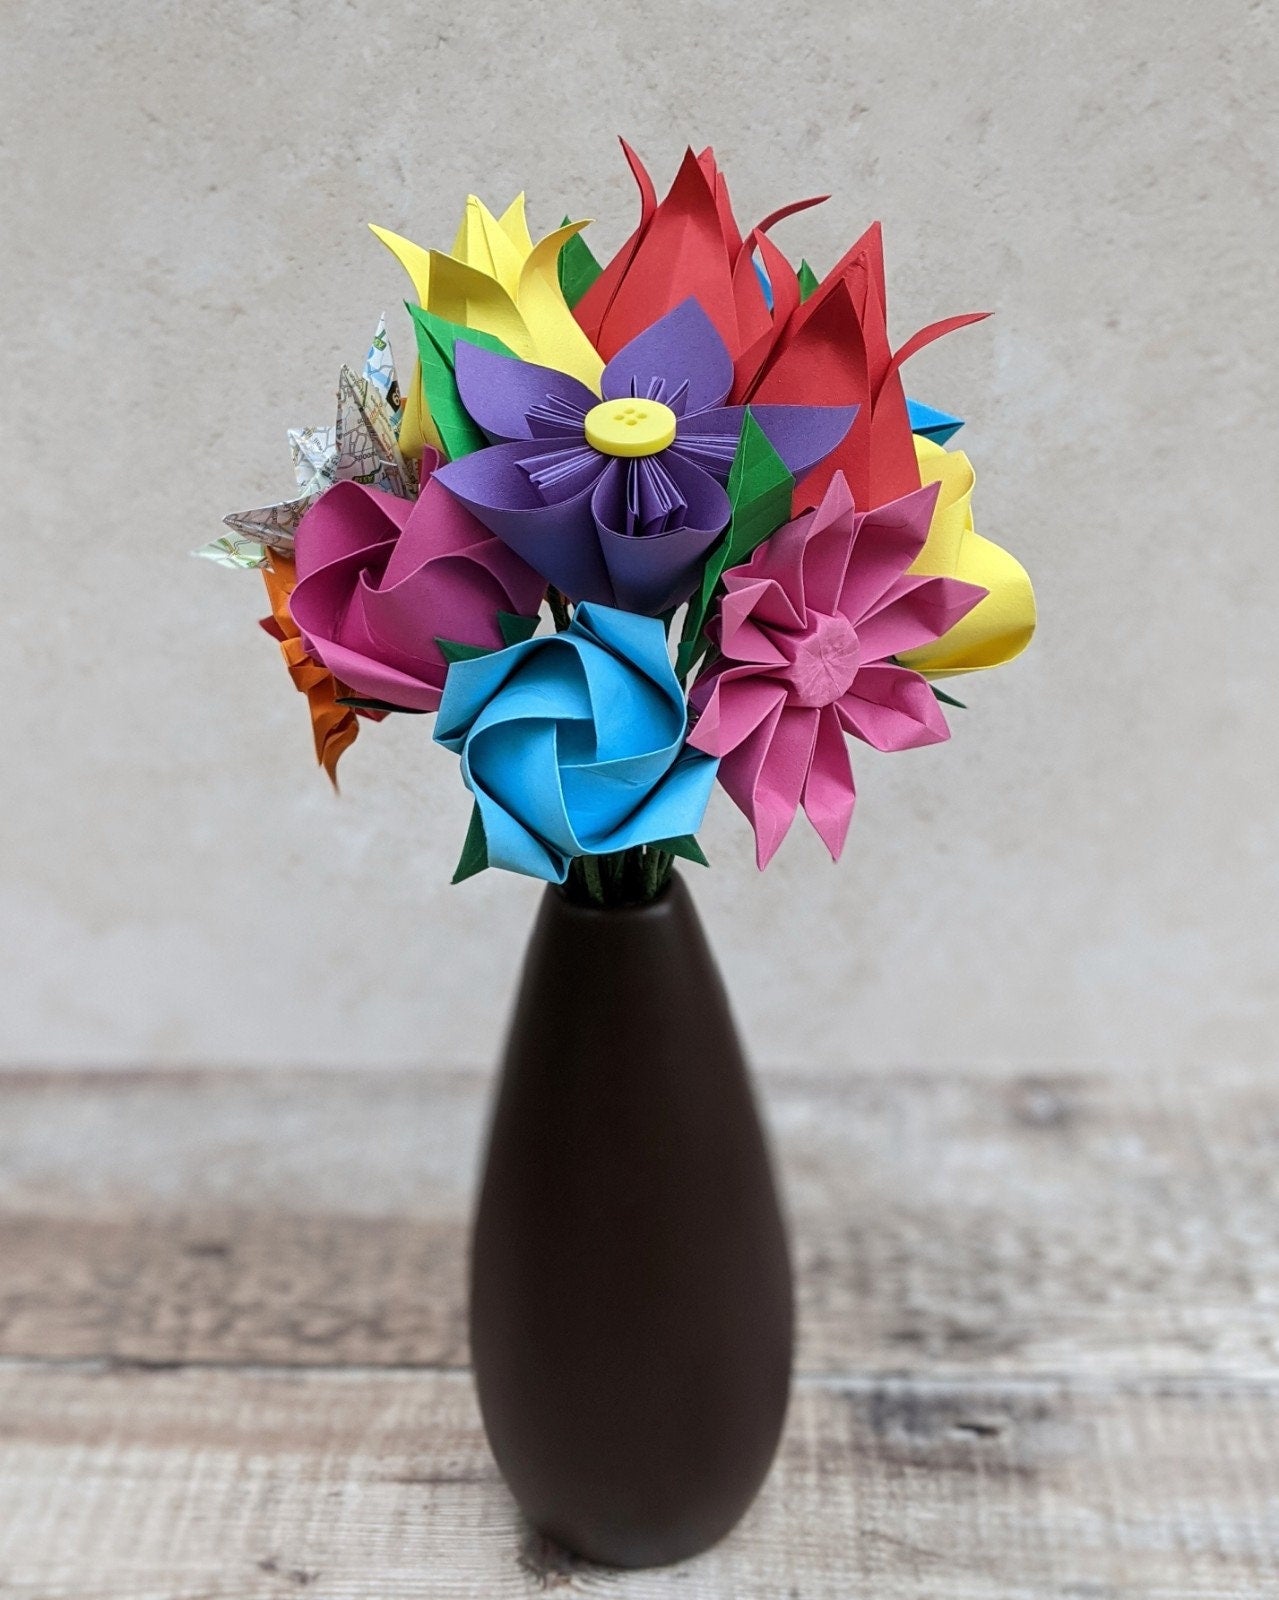 Colourful origami wedding bouquet with upcycled map paper flowers